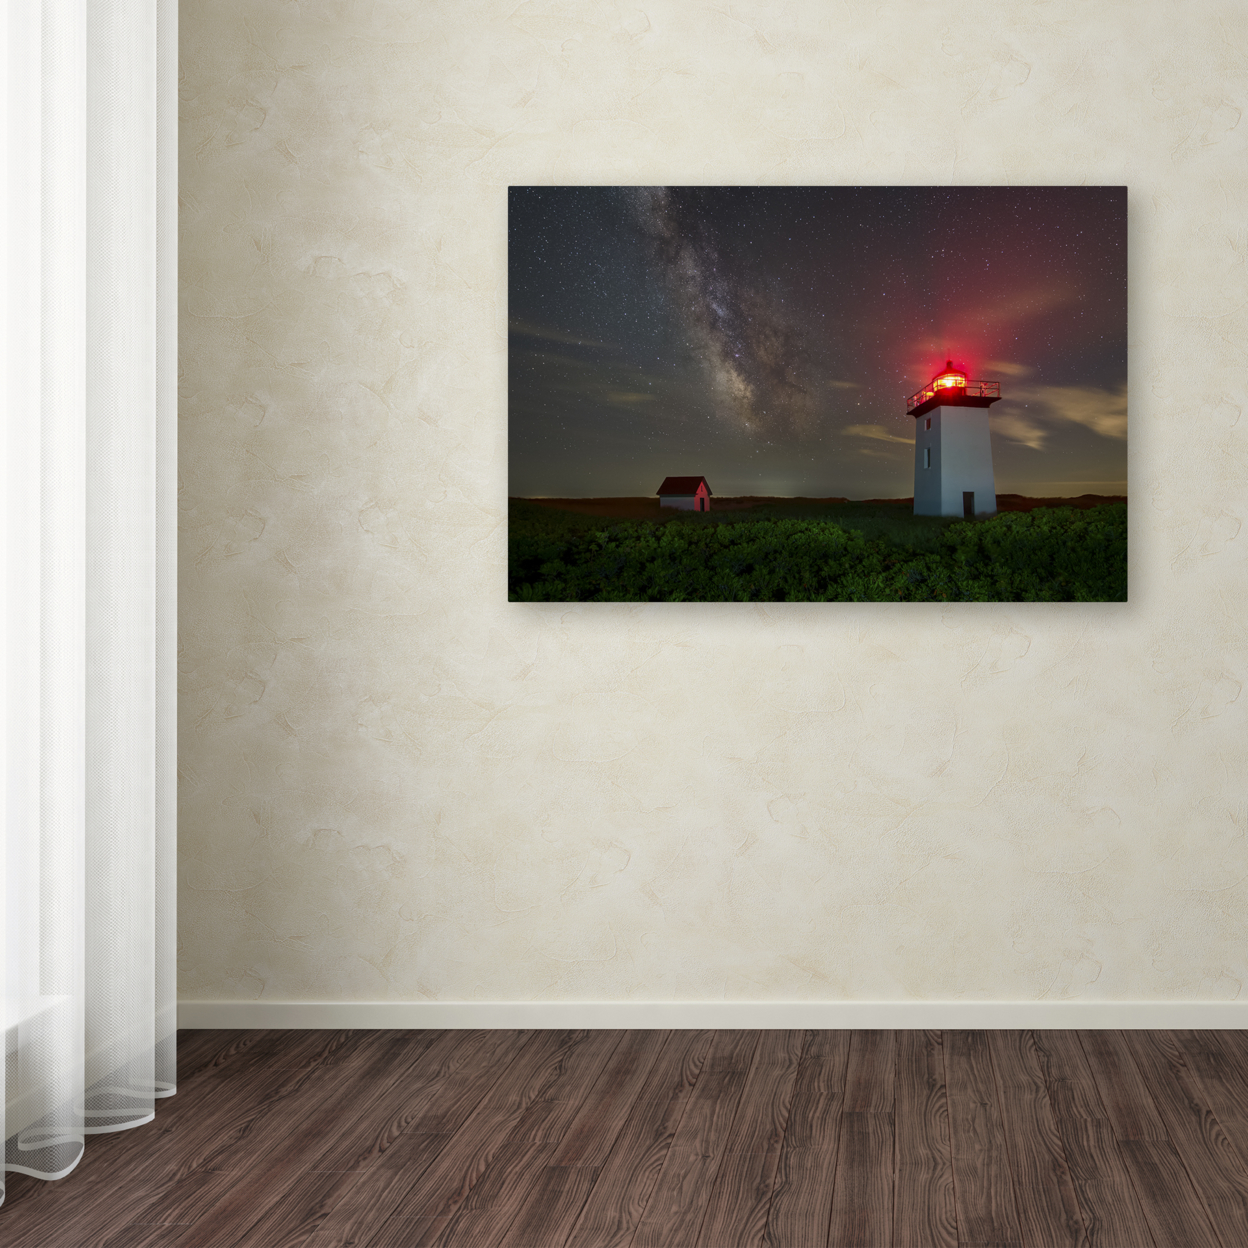 Michael Blanchette Photography 'Wood End Nights' Canvas Art 16 X 24